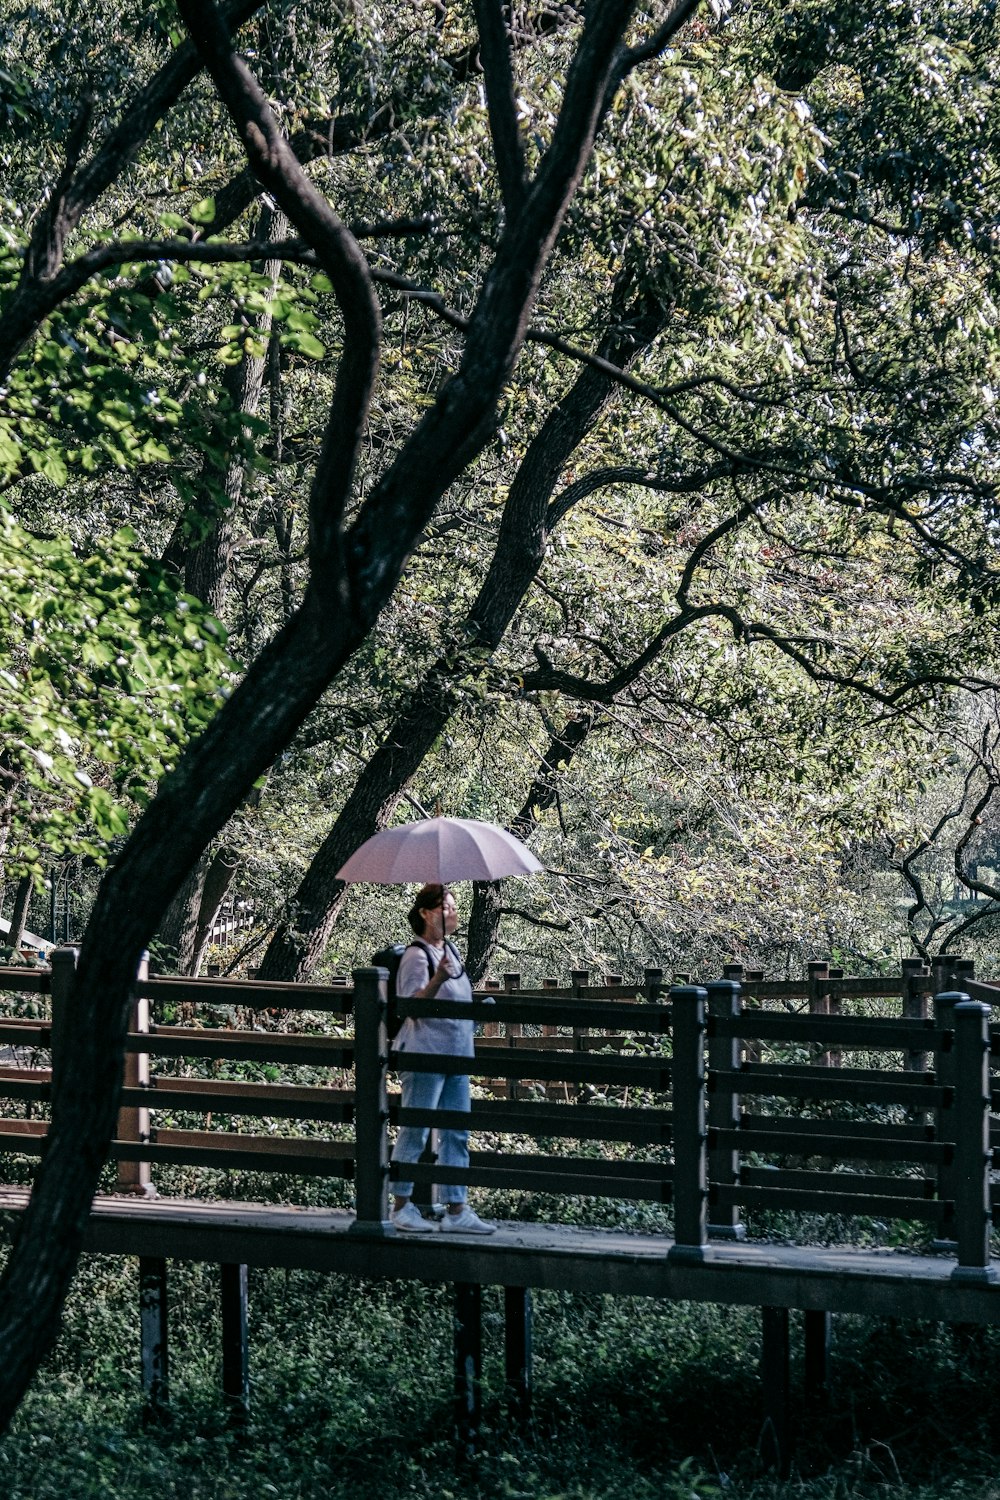 a person standing on a bench holding an umbrella